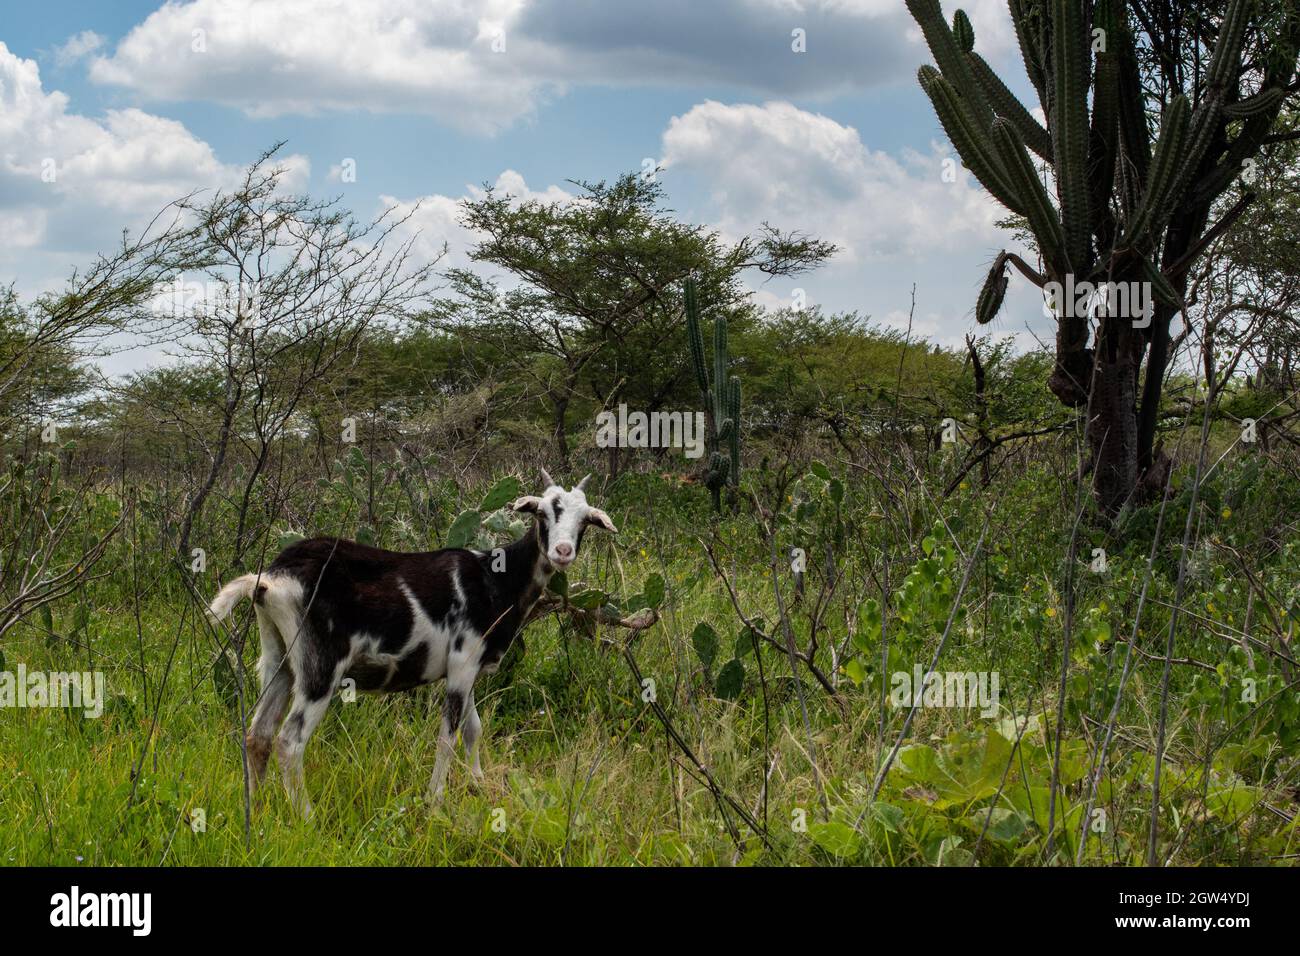 A goat eats grass next to a cactus tree during a Humanitarian Mission developed by 'De Corazon Guajira' in Mayapo at La Guajira - Colombia were they visited the Wayuu indigenous communities 'Pactalia, Poromana, Perrohuila' on September 26, 2021. The Guajira region in Colombia is the poorest region in Colombia, with its people commongly living without drinkable water, electricity and food. Stock Photo